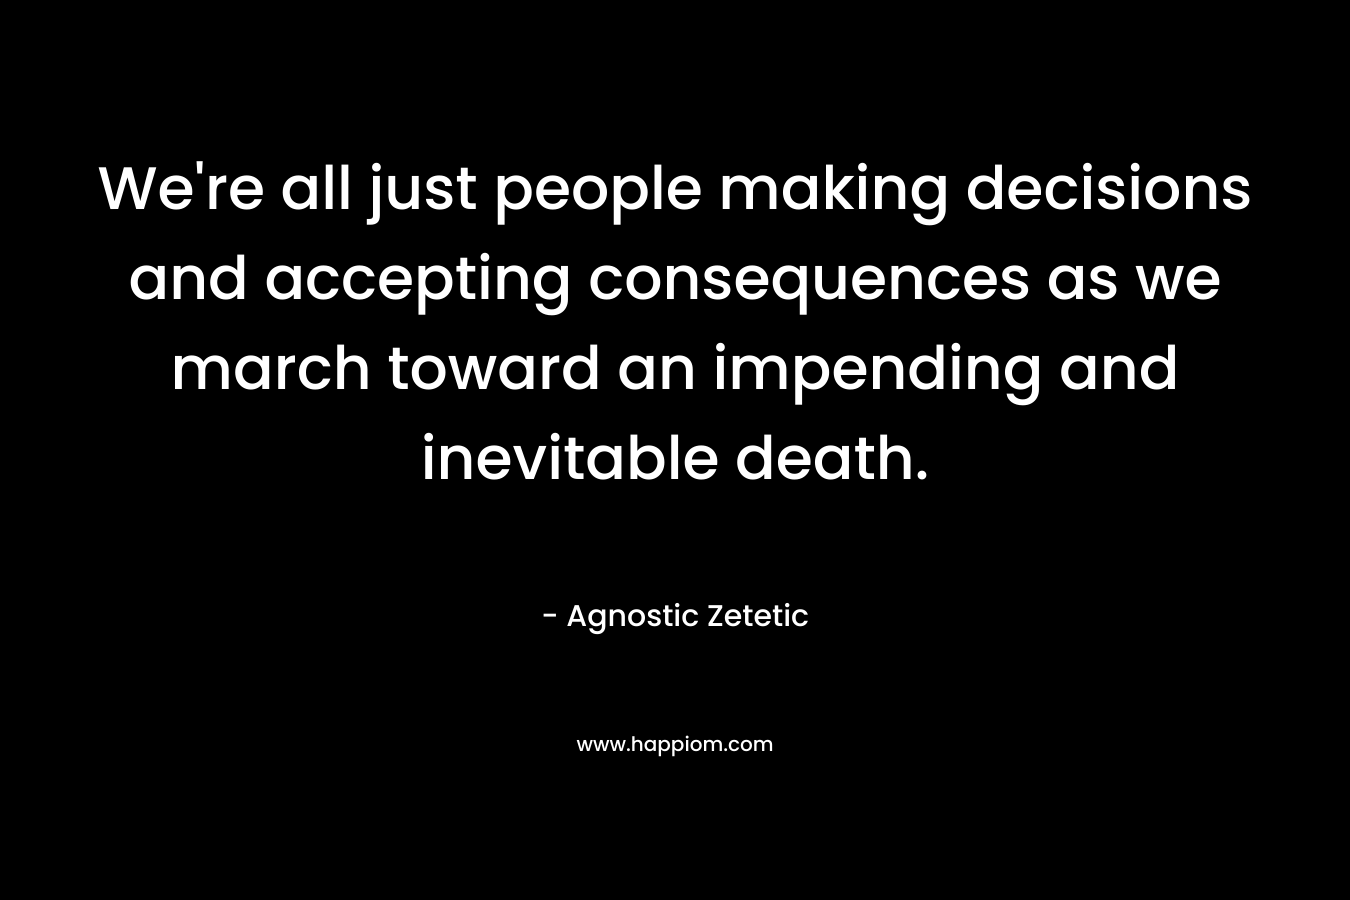 We’re all just people making decisions and accepting consequences as we march toward an impending and inevitable death. – Agnostic Zetetic